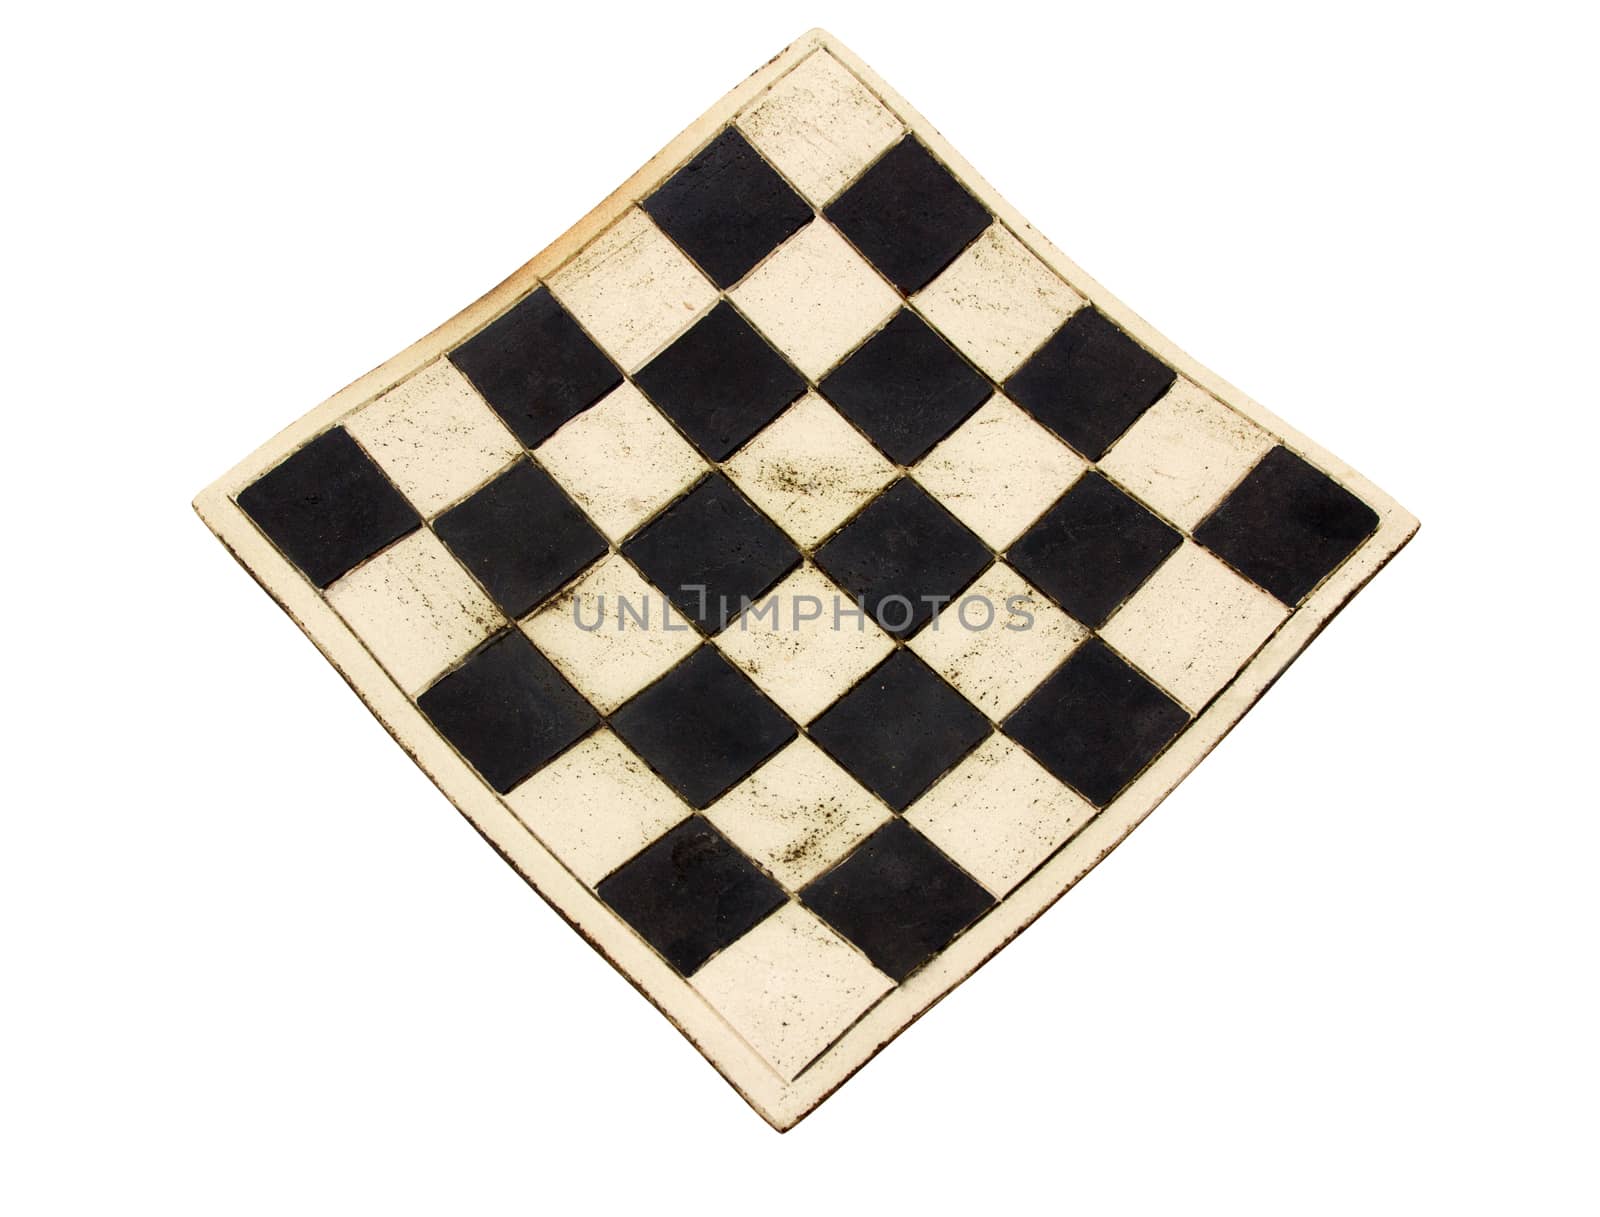 Empty curved ceramic chess board isolated on white background